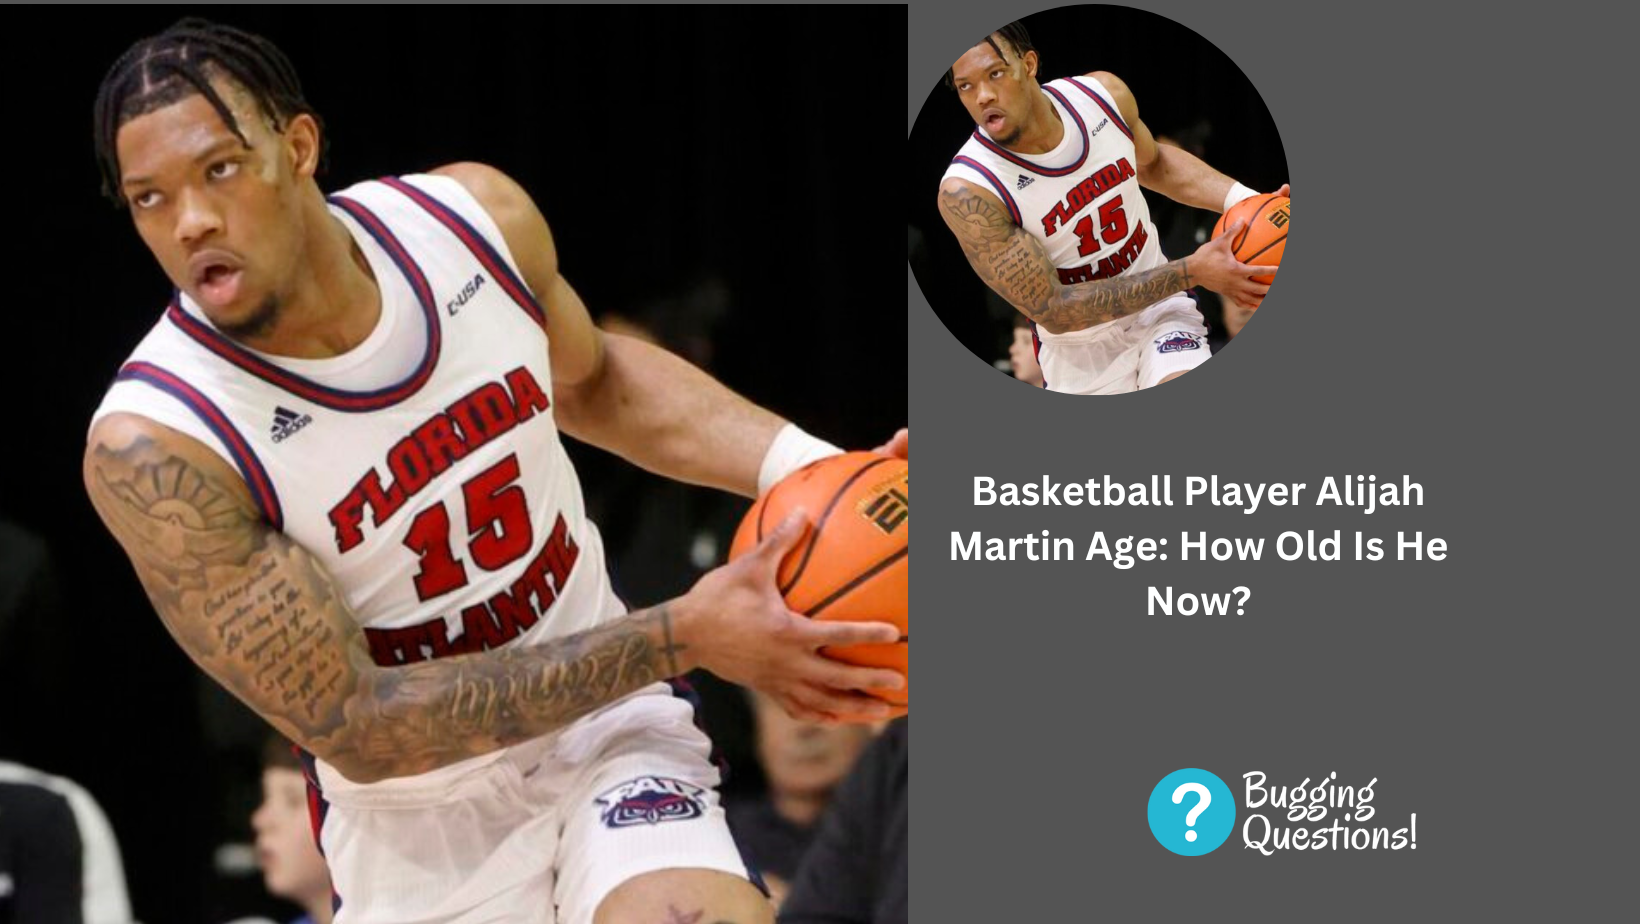 Basketball Player Alijah Martin Age: How Old Is He Now?